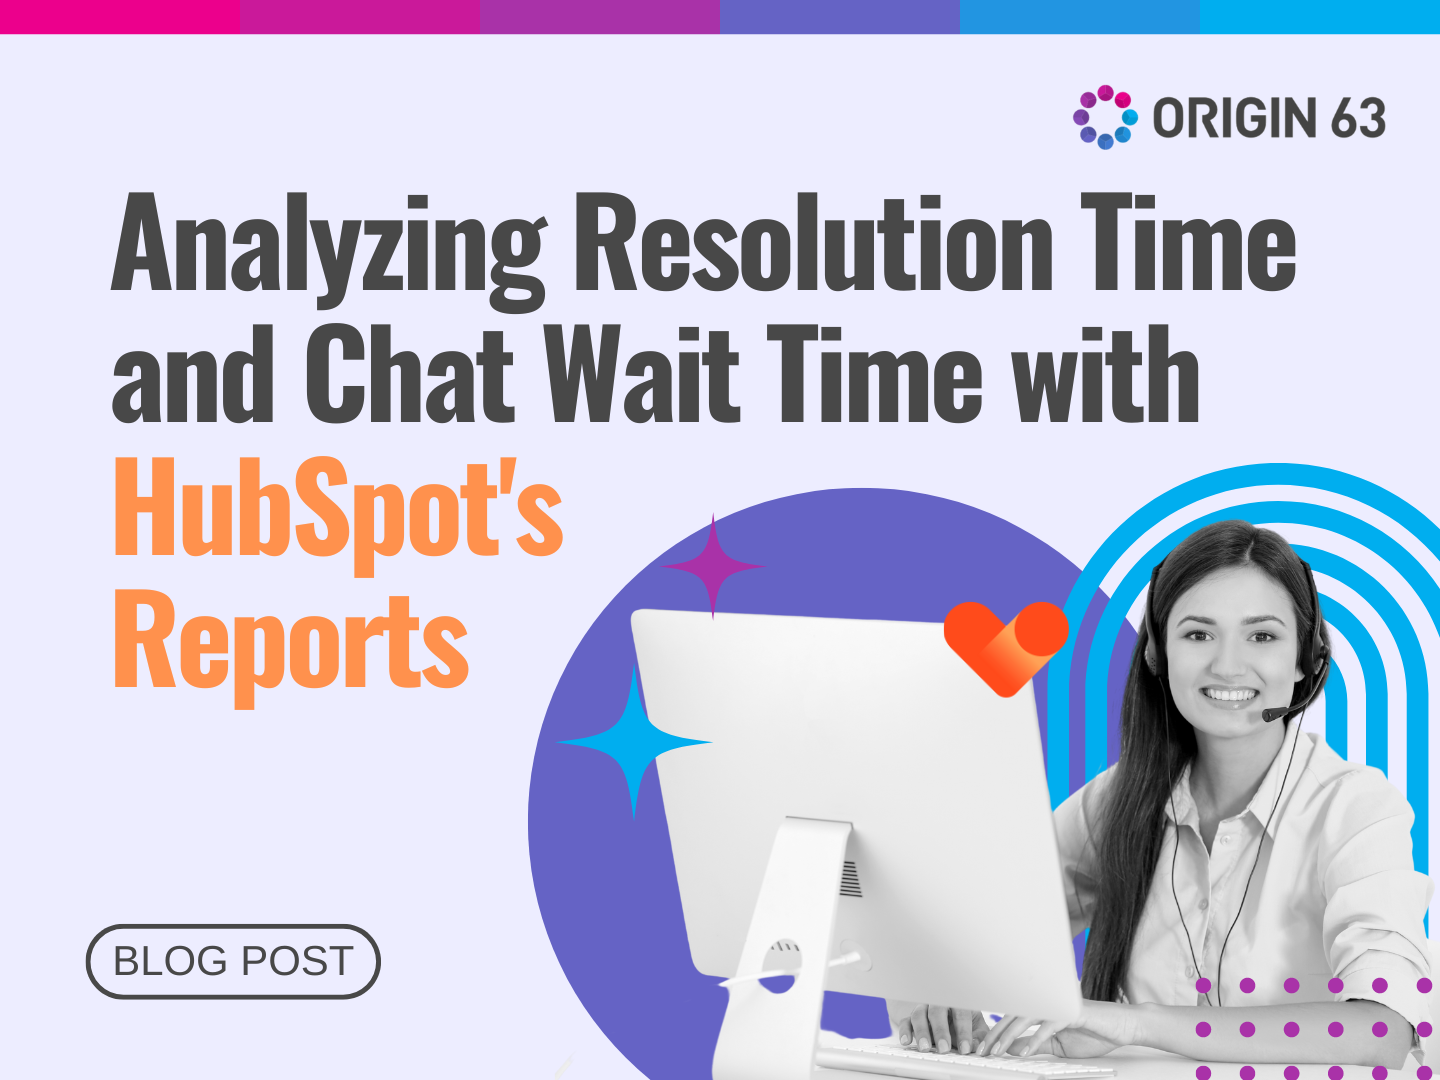  Learn to analyze metrics like resolution time & chat wait time in this easy guide.